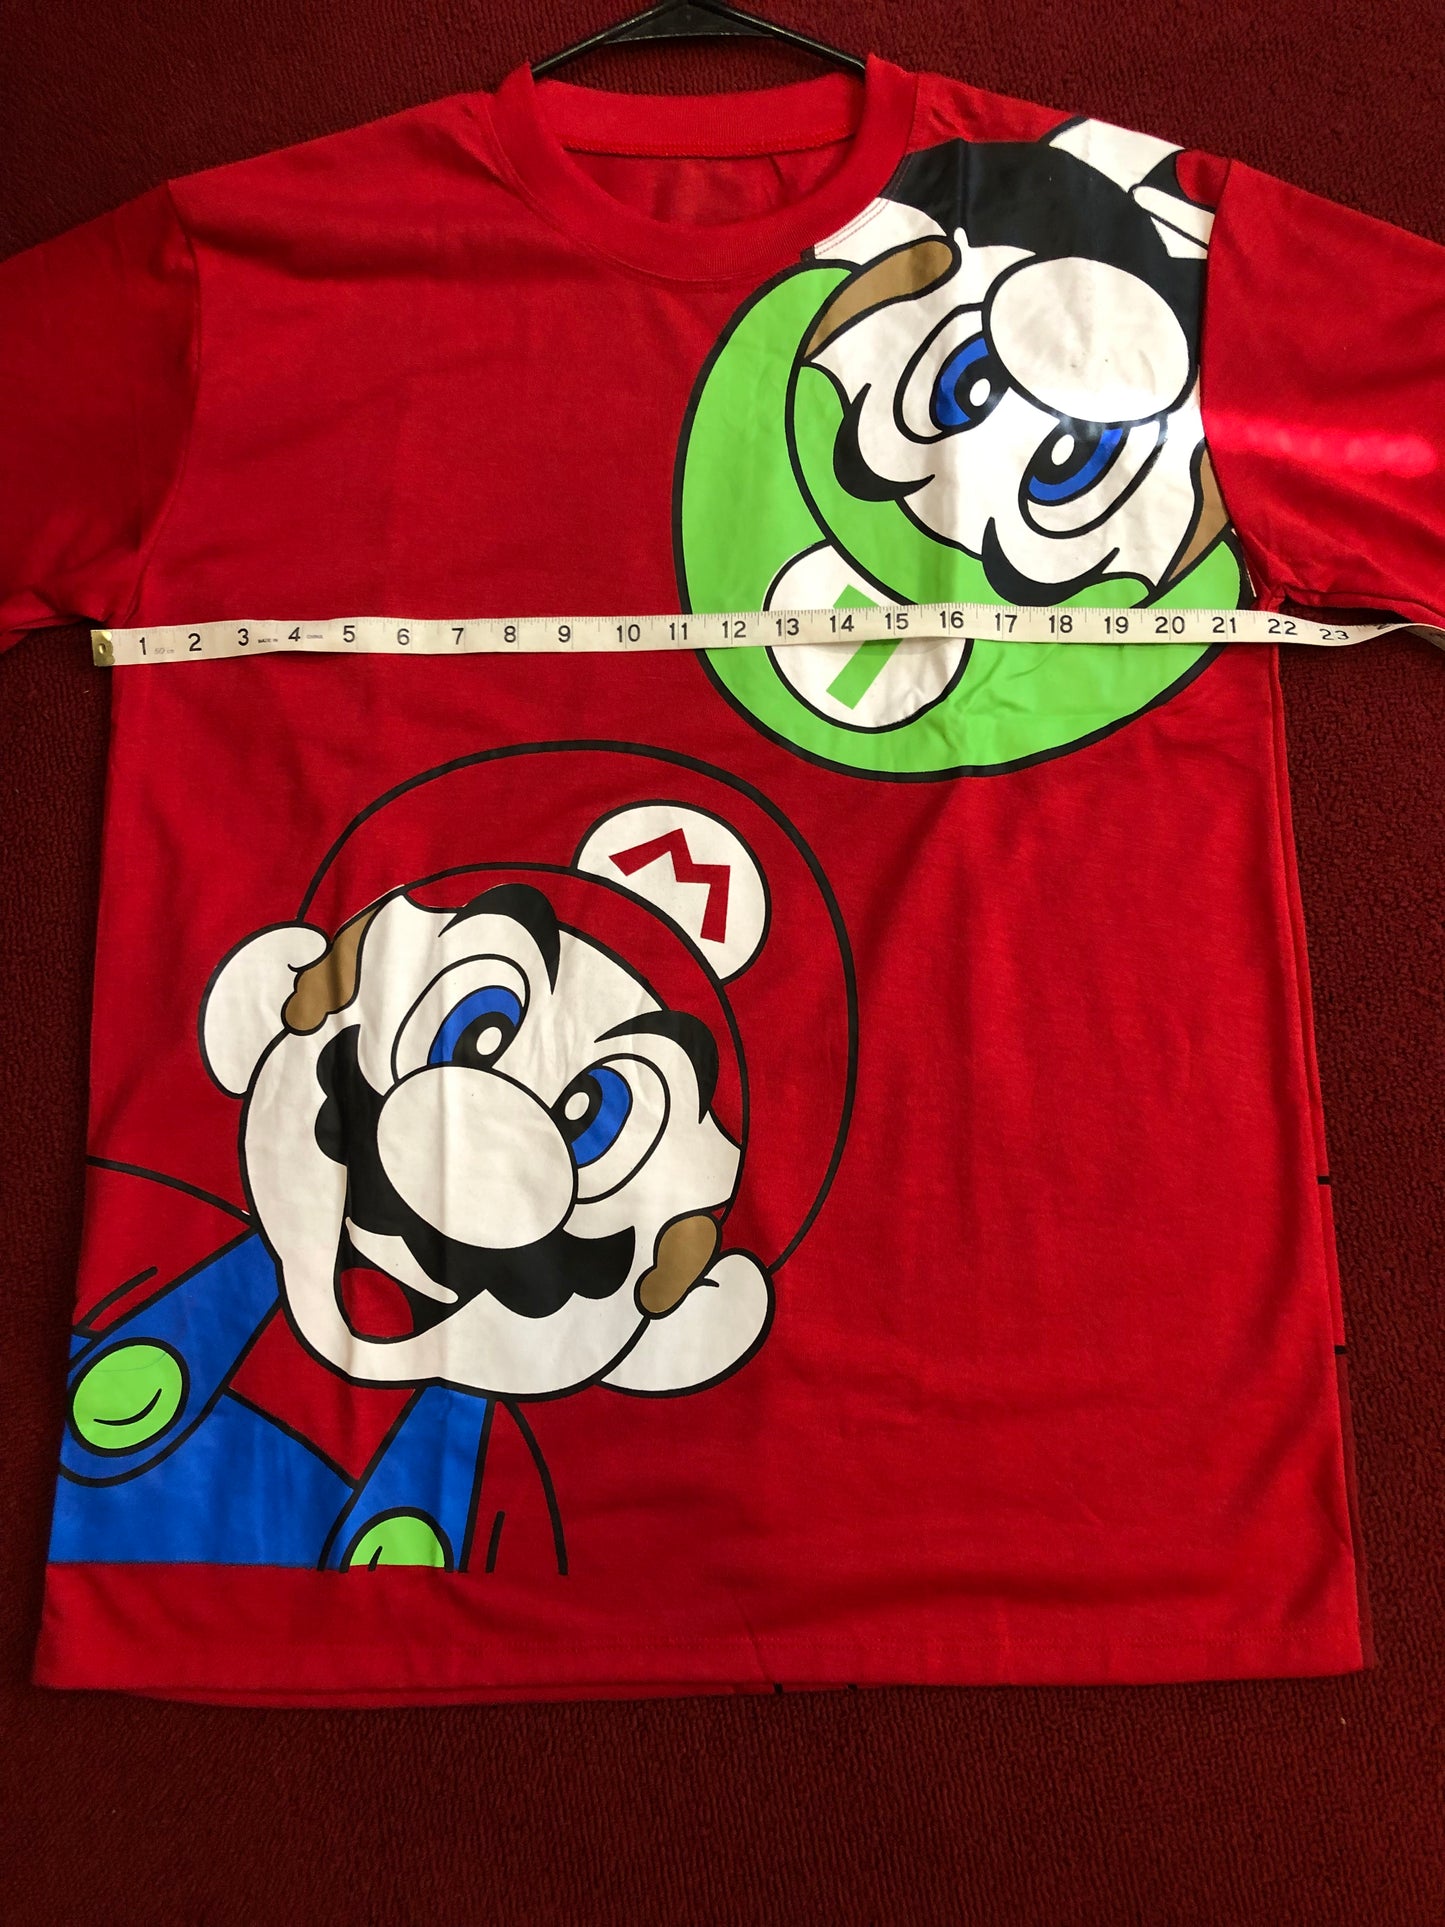 Men/Woman Graphic Nintendo Super Mario T-Shirt Color Red Size L/XL "New Arrival" SOLD OUT